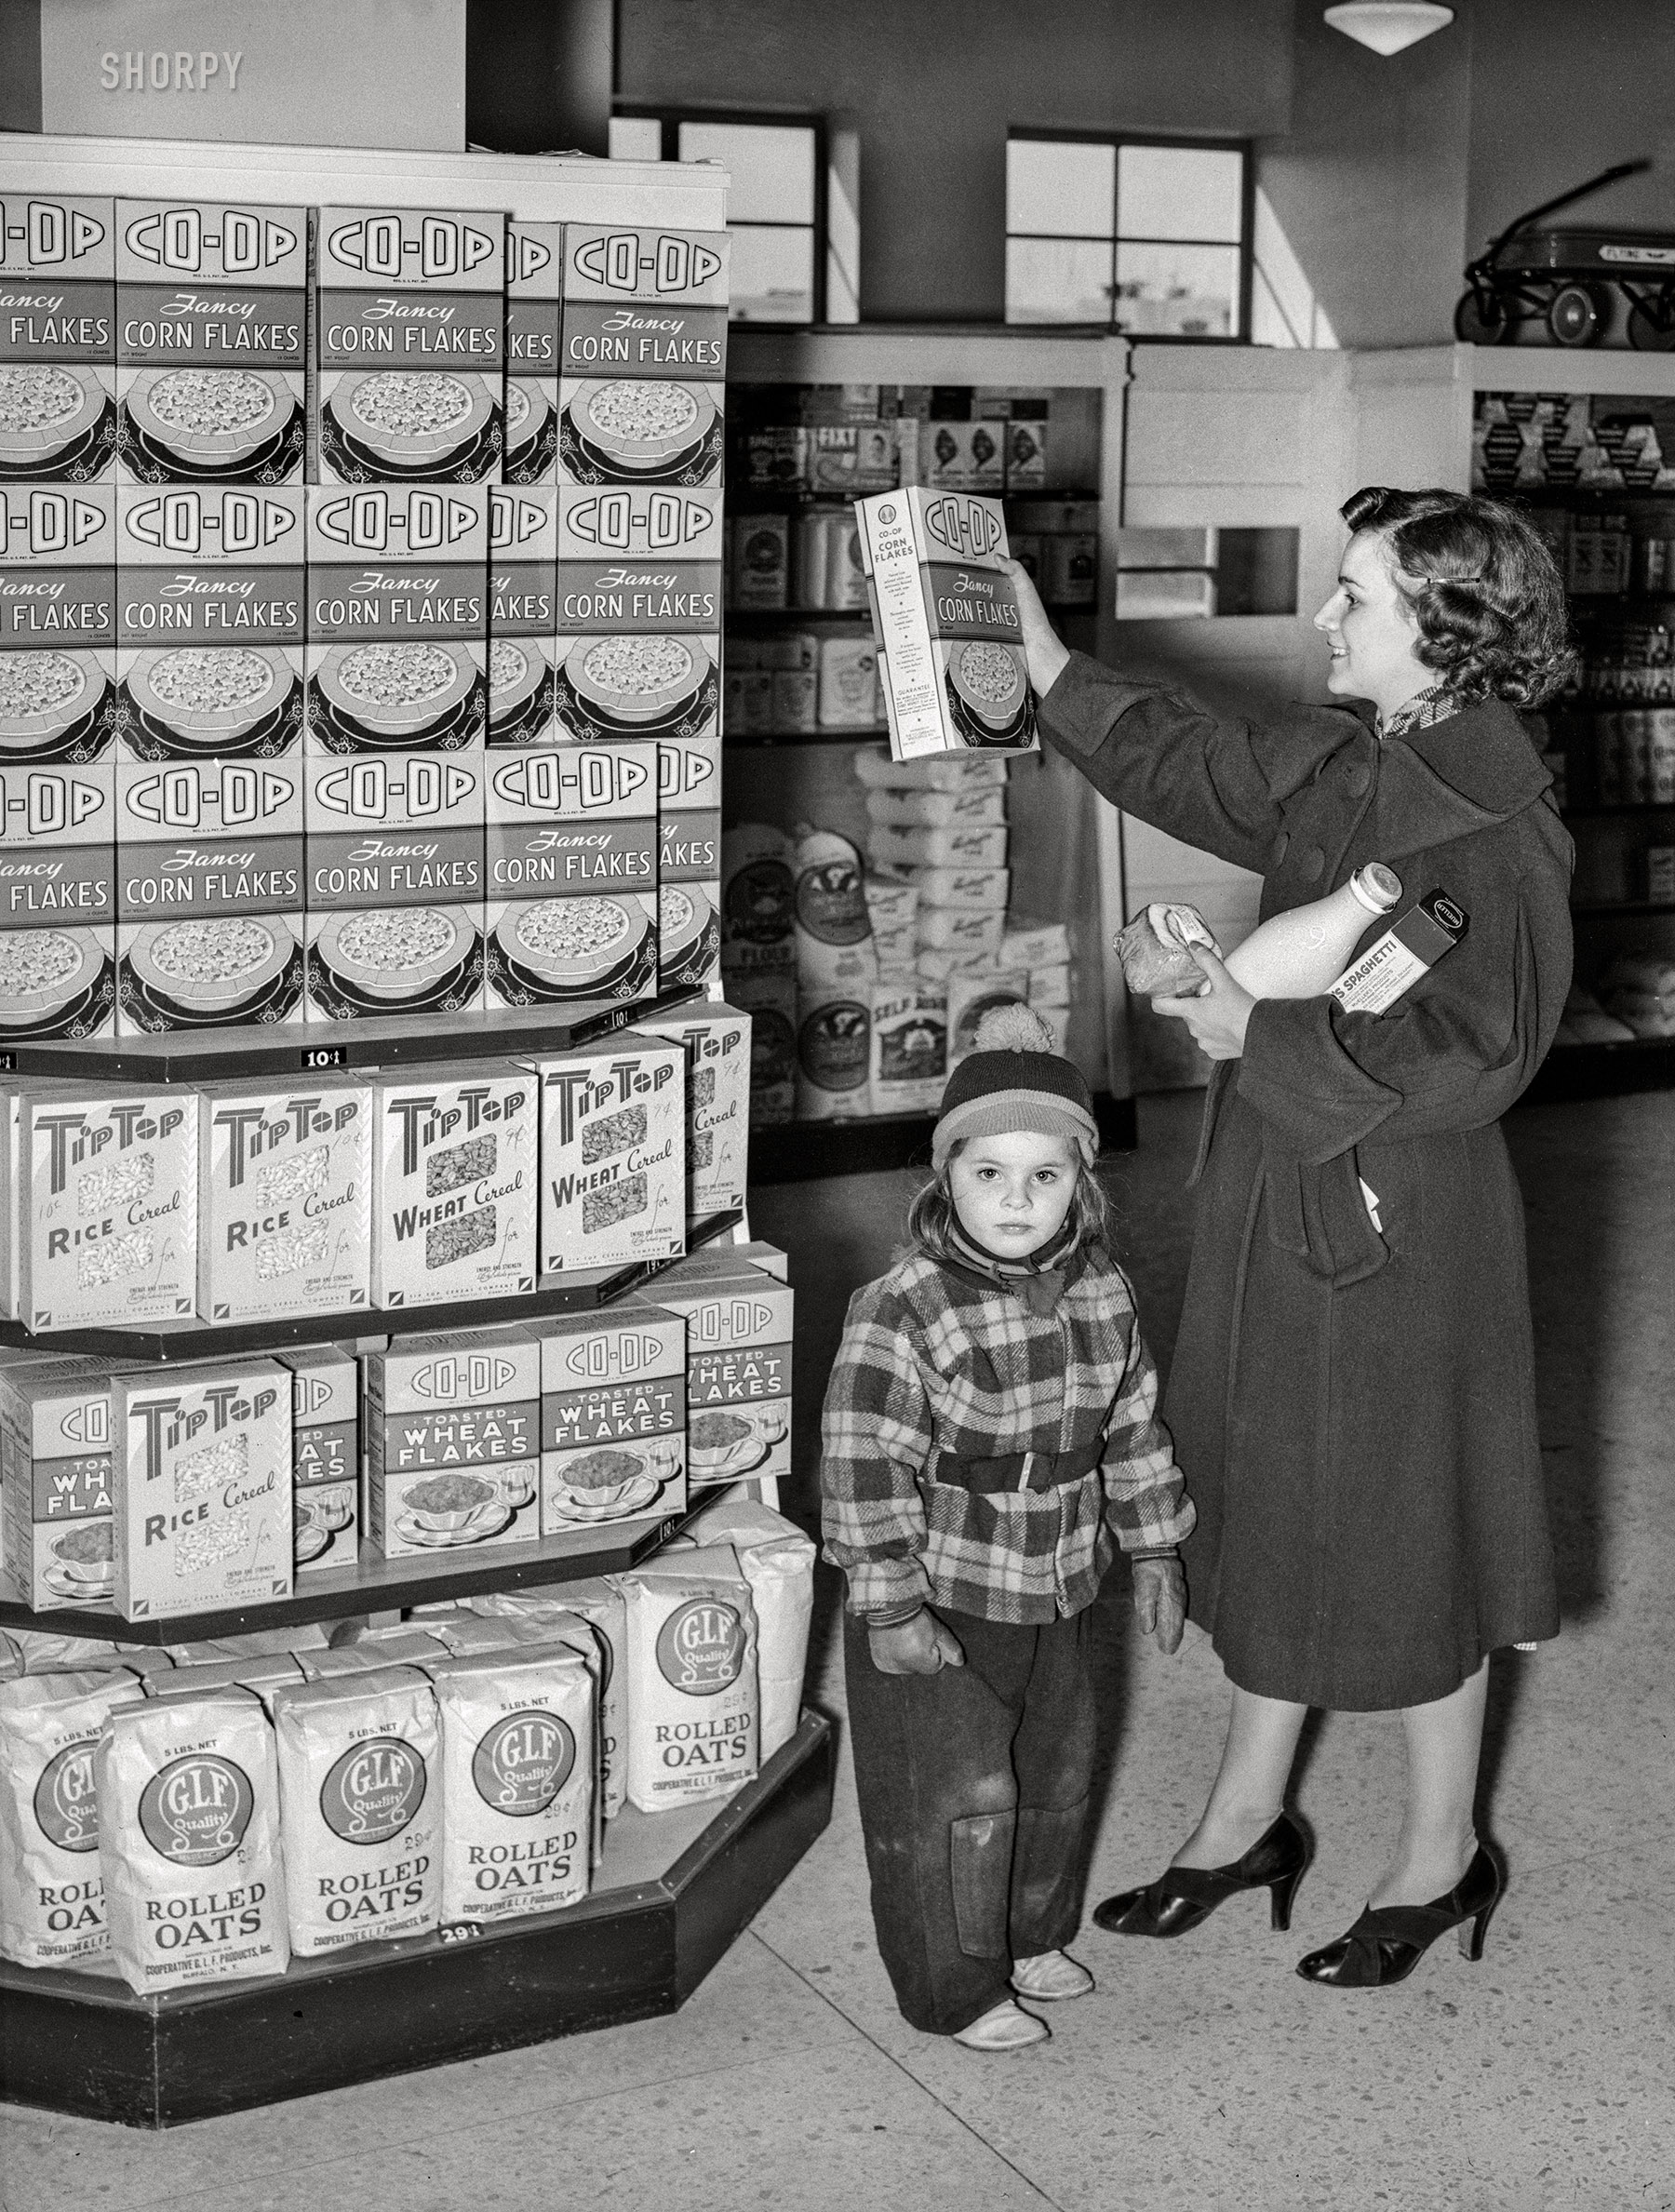 February 1938. "Resident at Greenbelt, Maryland, with child in the cooperative grocery store. Greenbelt is a model community planned by the Suburban Division of U.S. Resettlement Administration." Medium format acetate negative by Russell Lee. View full size.